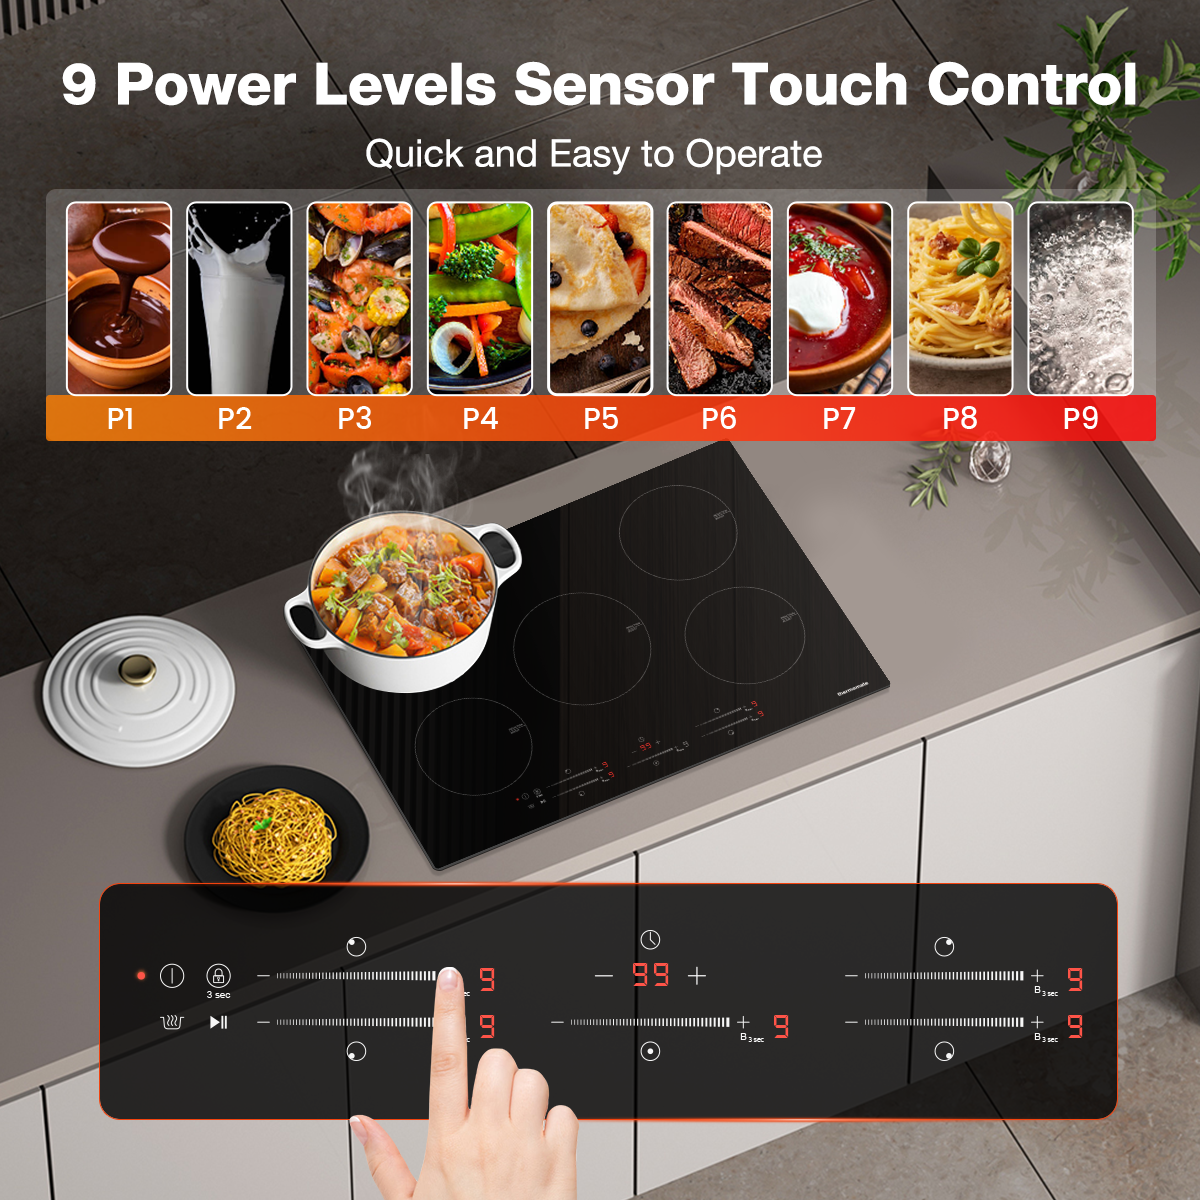 9 Power Levels Sensor Touch Control | Thermomate